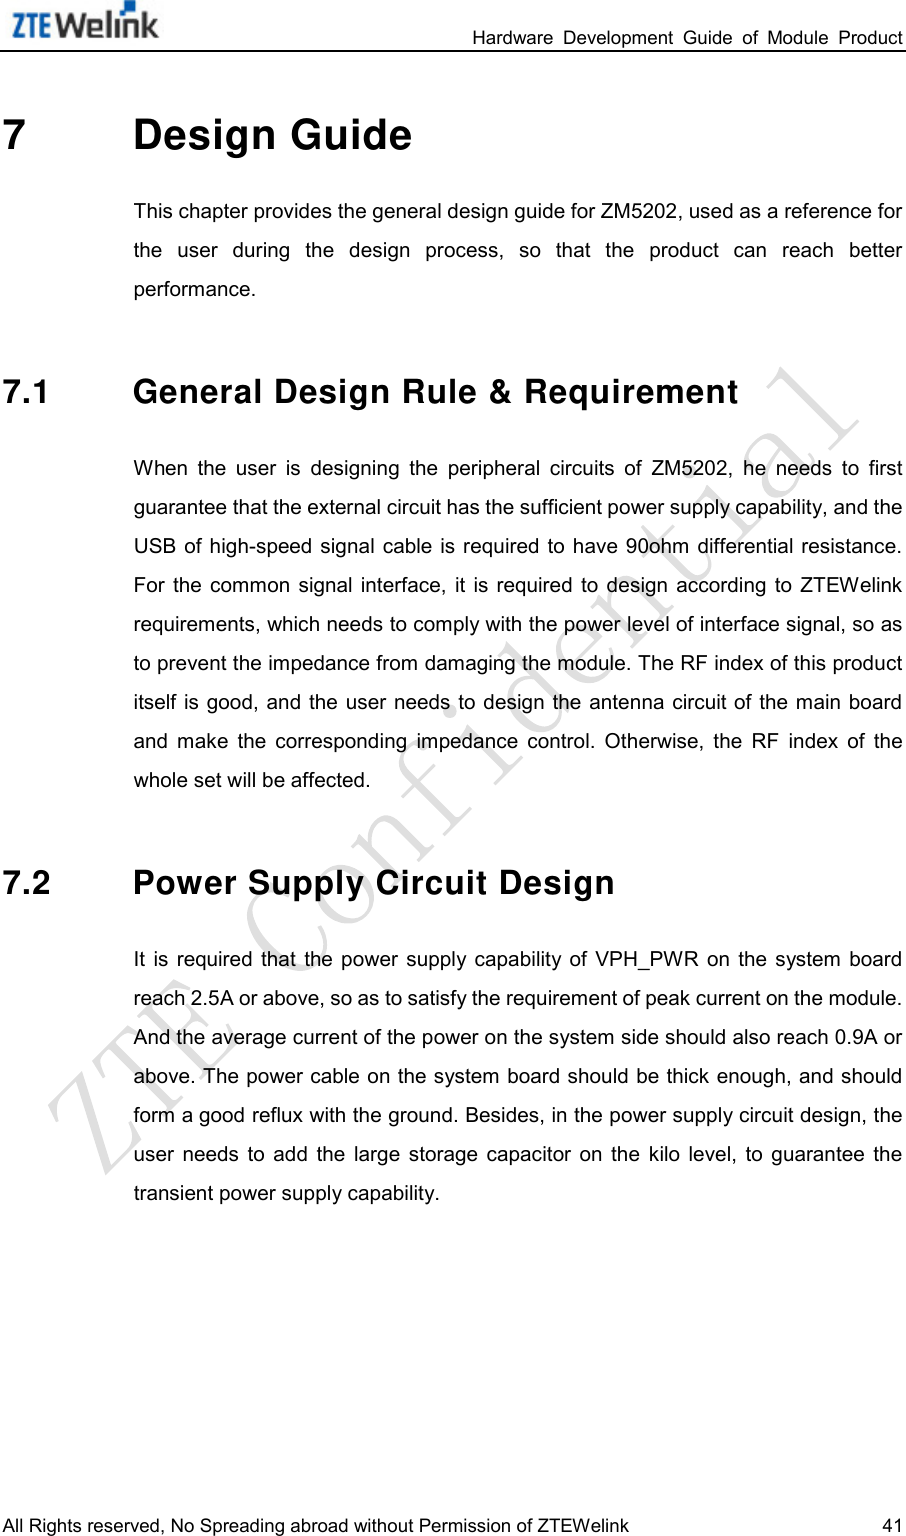                                                                 Hardware  Development  Guide  of  Module  Product All Rights reserved, No Spreading abroad without Permission of ZTEWelink 41 7  Design Guide This chapter provides the general design guide for ZM5202, used as a reference for the  user  during  the  design  process,  so  that  the  product  can  reach  better performance.   7.1 General Design Rule &amp; Requirement When  the  user  is  designing  the  peripheral  circuits  of ZM5202,  he  needs  to  first guarantee that the external circuit has the sufficient power supply capability, and the USB of high-speed signal cable is required to  have 90ohm  differential resistance. For  the  common  signal  interface,  it  is required to  design  according  to  ZTEWelink requirements, which needs to comply with the power level of interface signal, so as to prevent the impedance from damaging the module. The RF index of this product itself is good, and the  user needs to design the antenna circuit of the main board and  make  the  corresponding impedance  control.  Otherwise,  the RF  index  of  the whole set will be affected.   7.2 Power Supply Circuit Design It  is  required  that the power  supply  capability of  VPH_PWR  on  the system  board reach 2.5A or above, so as to satisfy the requirement of peak current on the module. And the average current of the power on the system side should also reach 0.9A or above. The power cable on the system board should be thick enough, and should form a good reflux with the ground. Besides, in the power supply circuit design, the user  needs  to  add  the large  storage capacitor  on  the kilo  level,  to  guarantee  the transient power supply capability.   